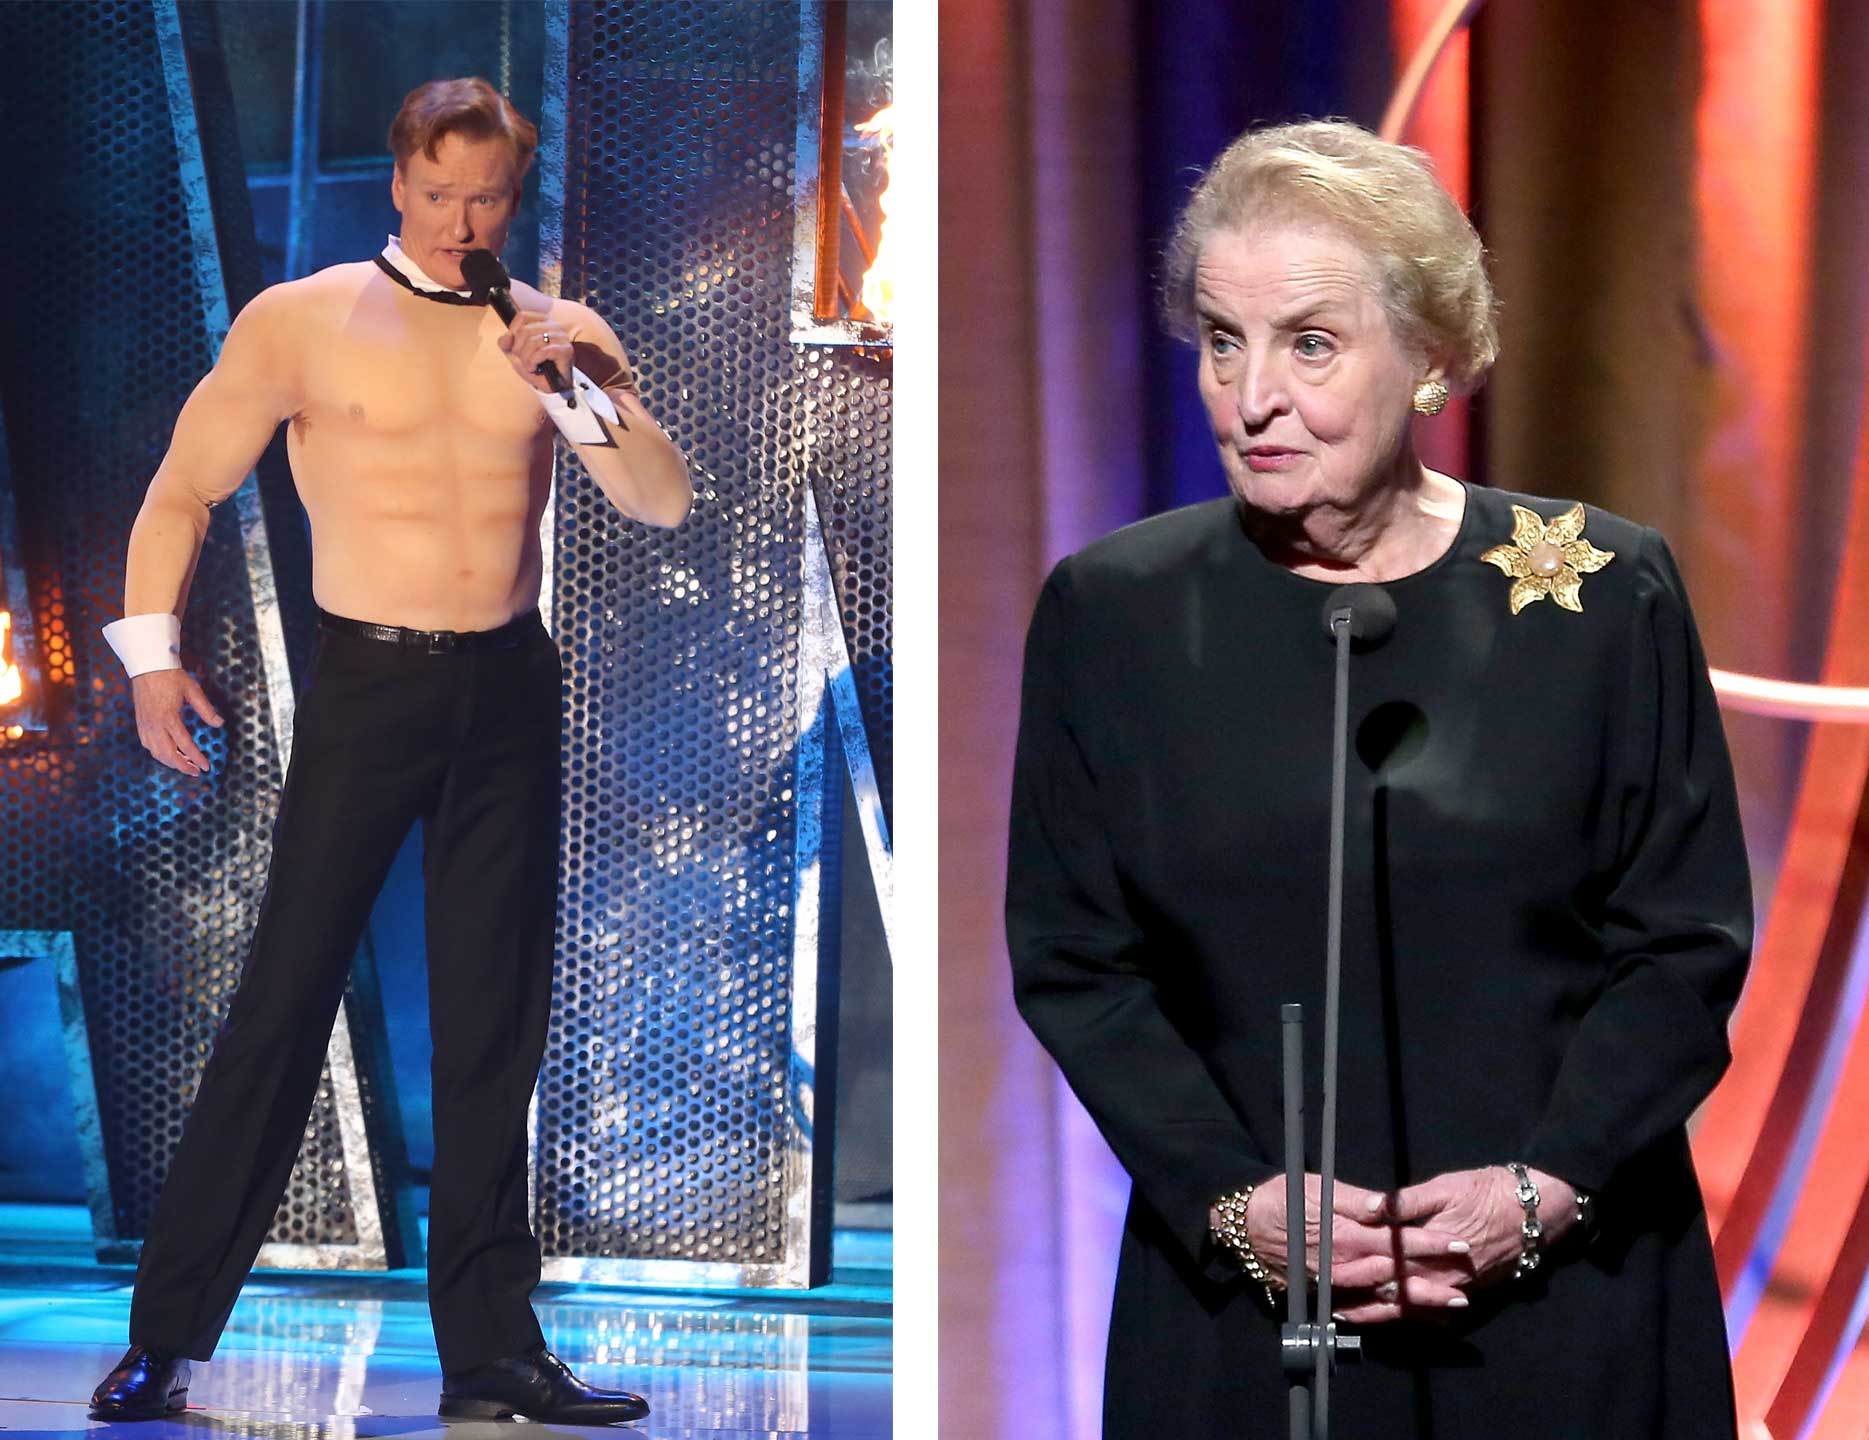 Conan O'brien wearing a muscle suit and Madeline Albright speaking at the 8th Annual Clinton Global Citizen Awards